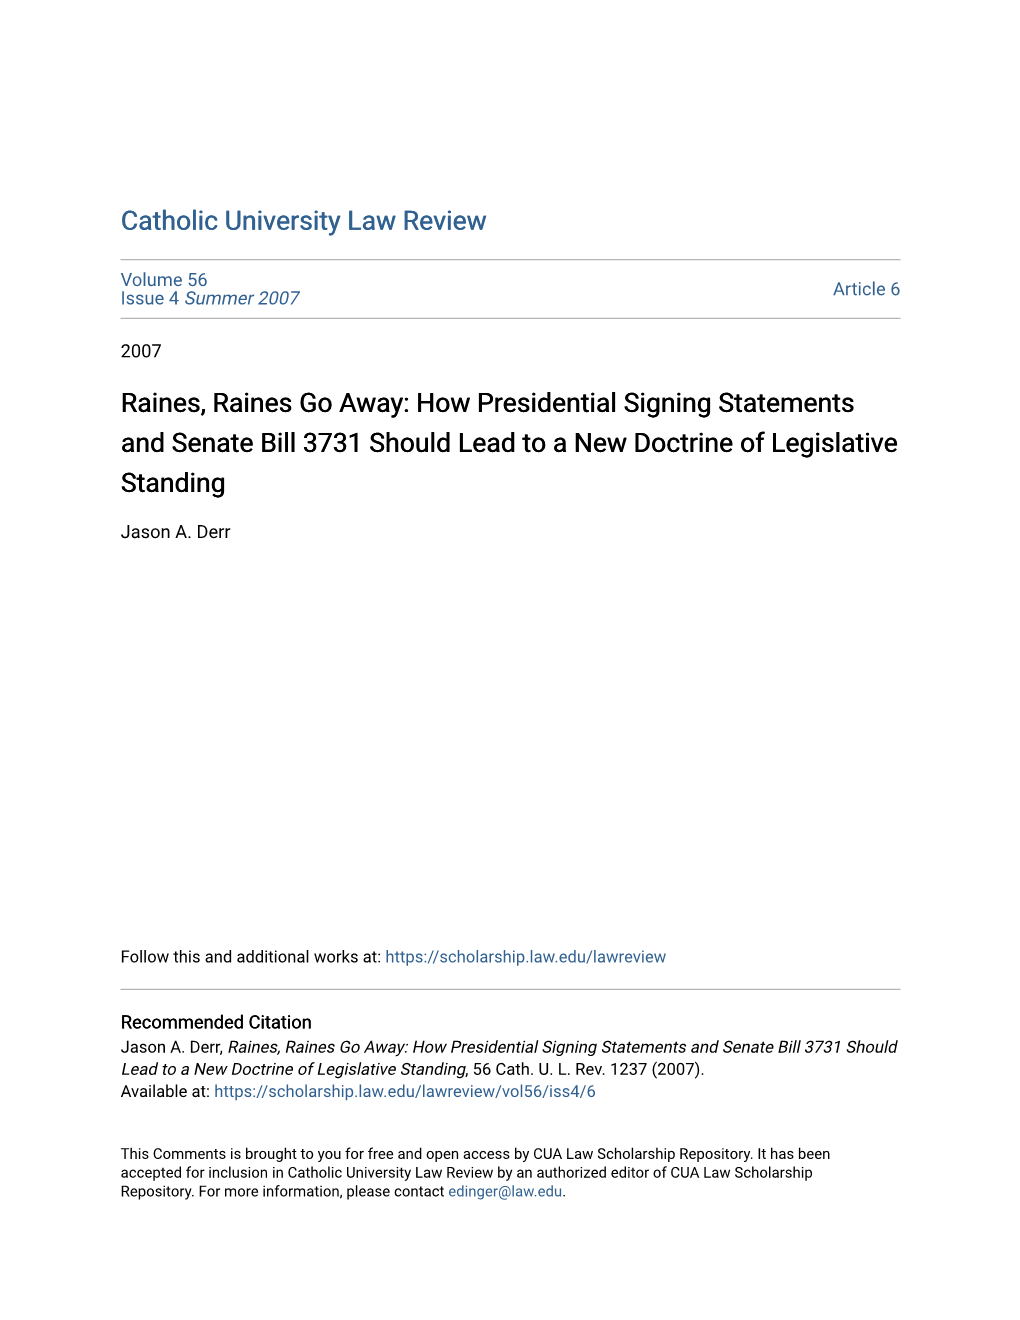 How Presidential Signing Statements and Senate Bill 3731 Should Lead to a New Doctrine of Legislative Standing